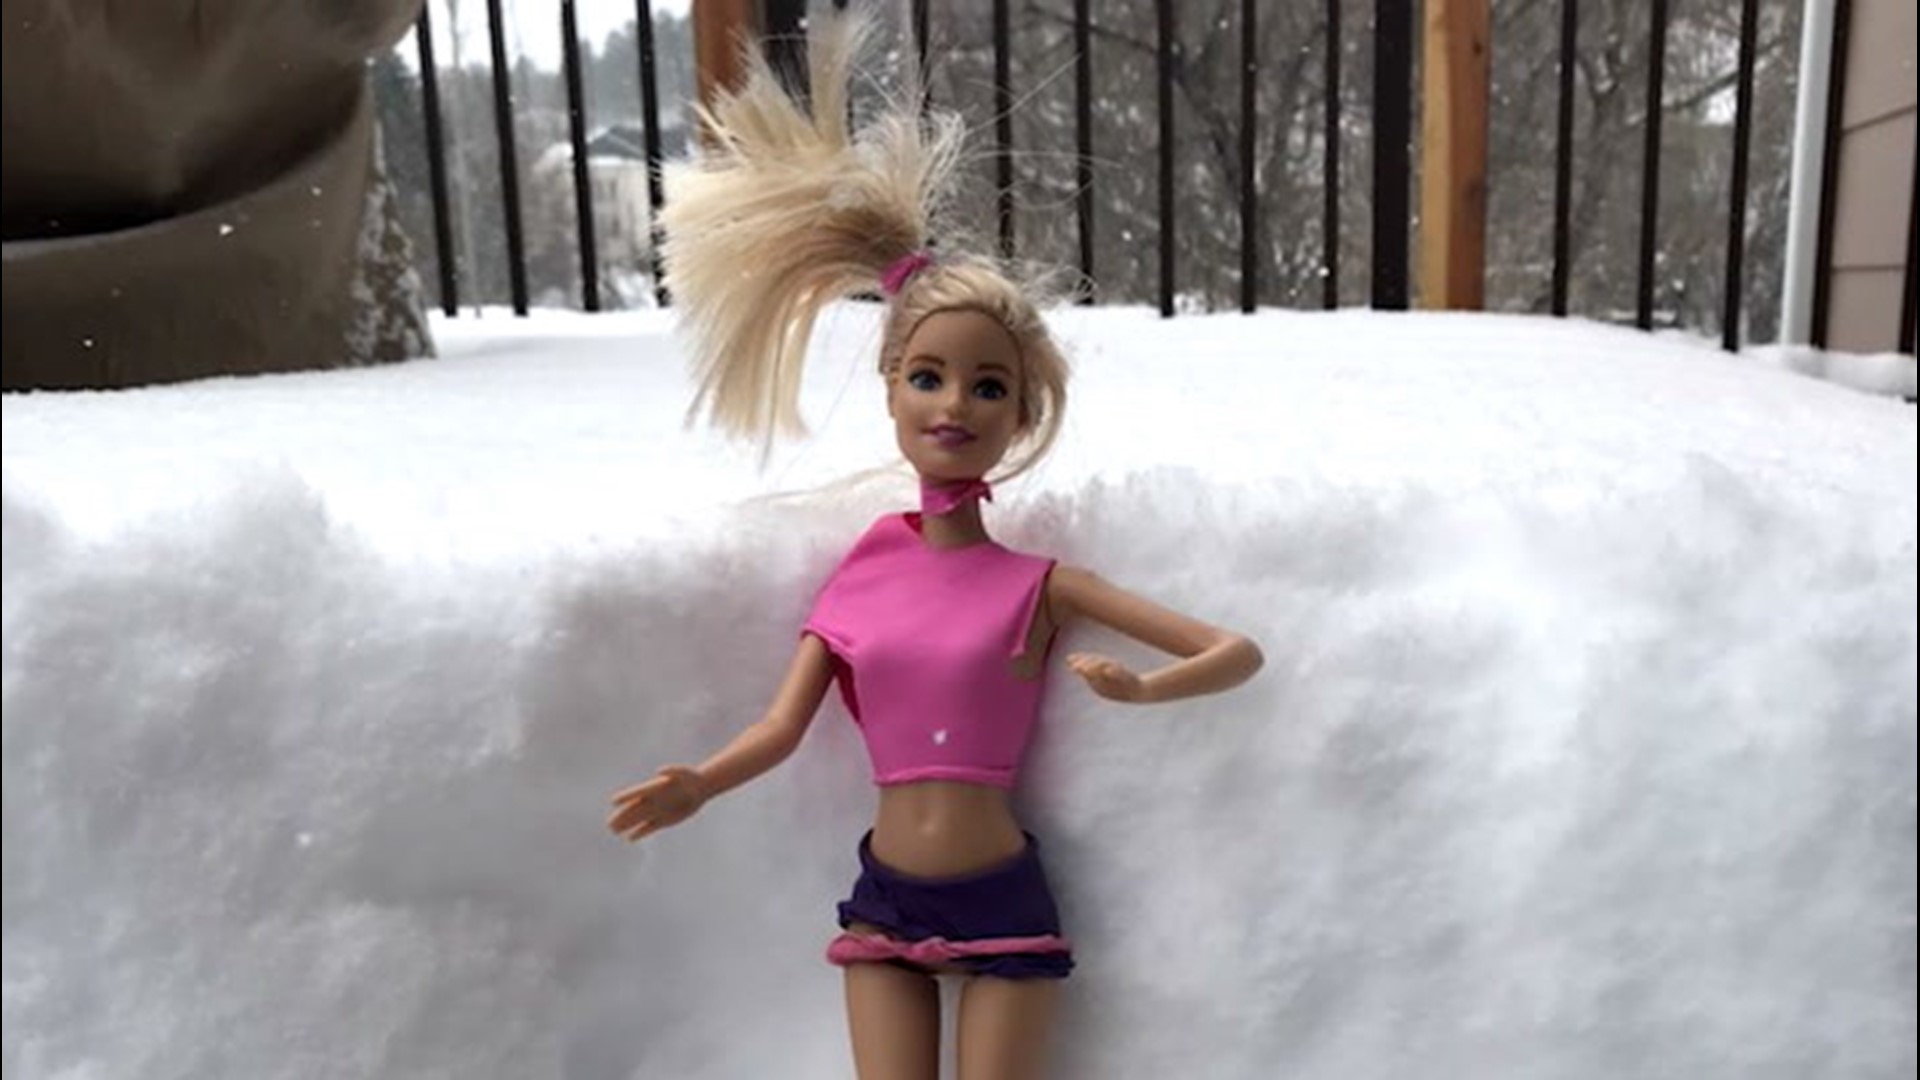 This Barbie doll was seen chilling out under 9 inches of snow in Rapid City, South Dakota, on April 2. She's not dressed for the weather though.